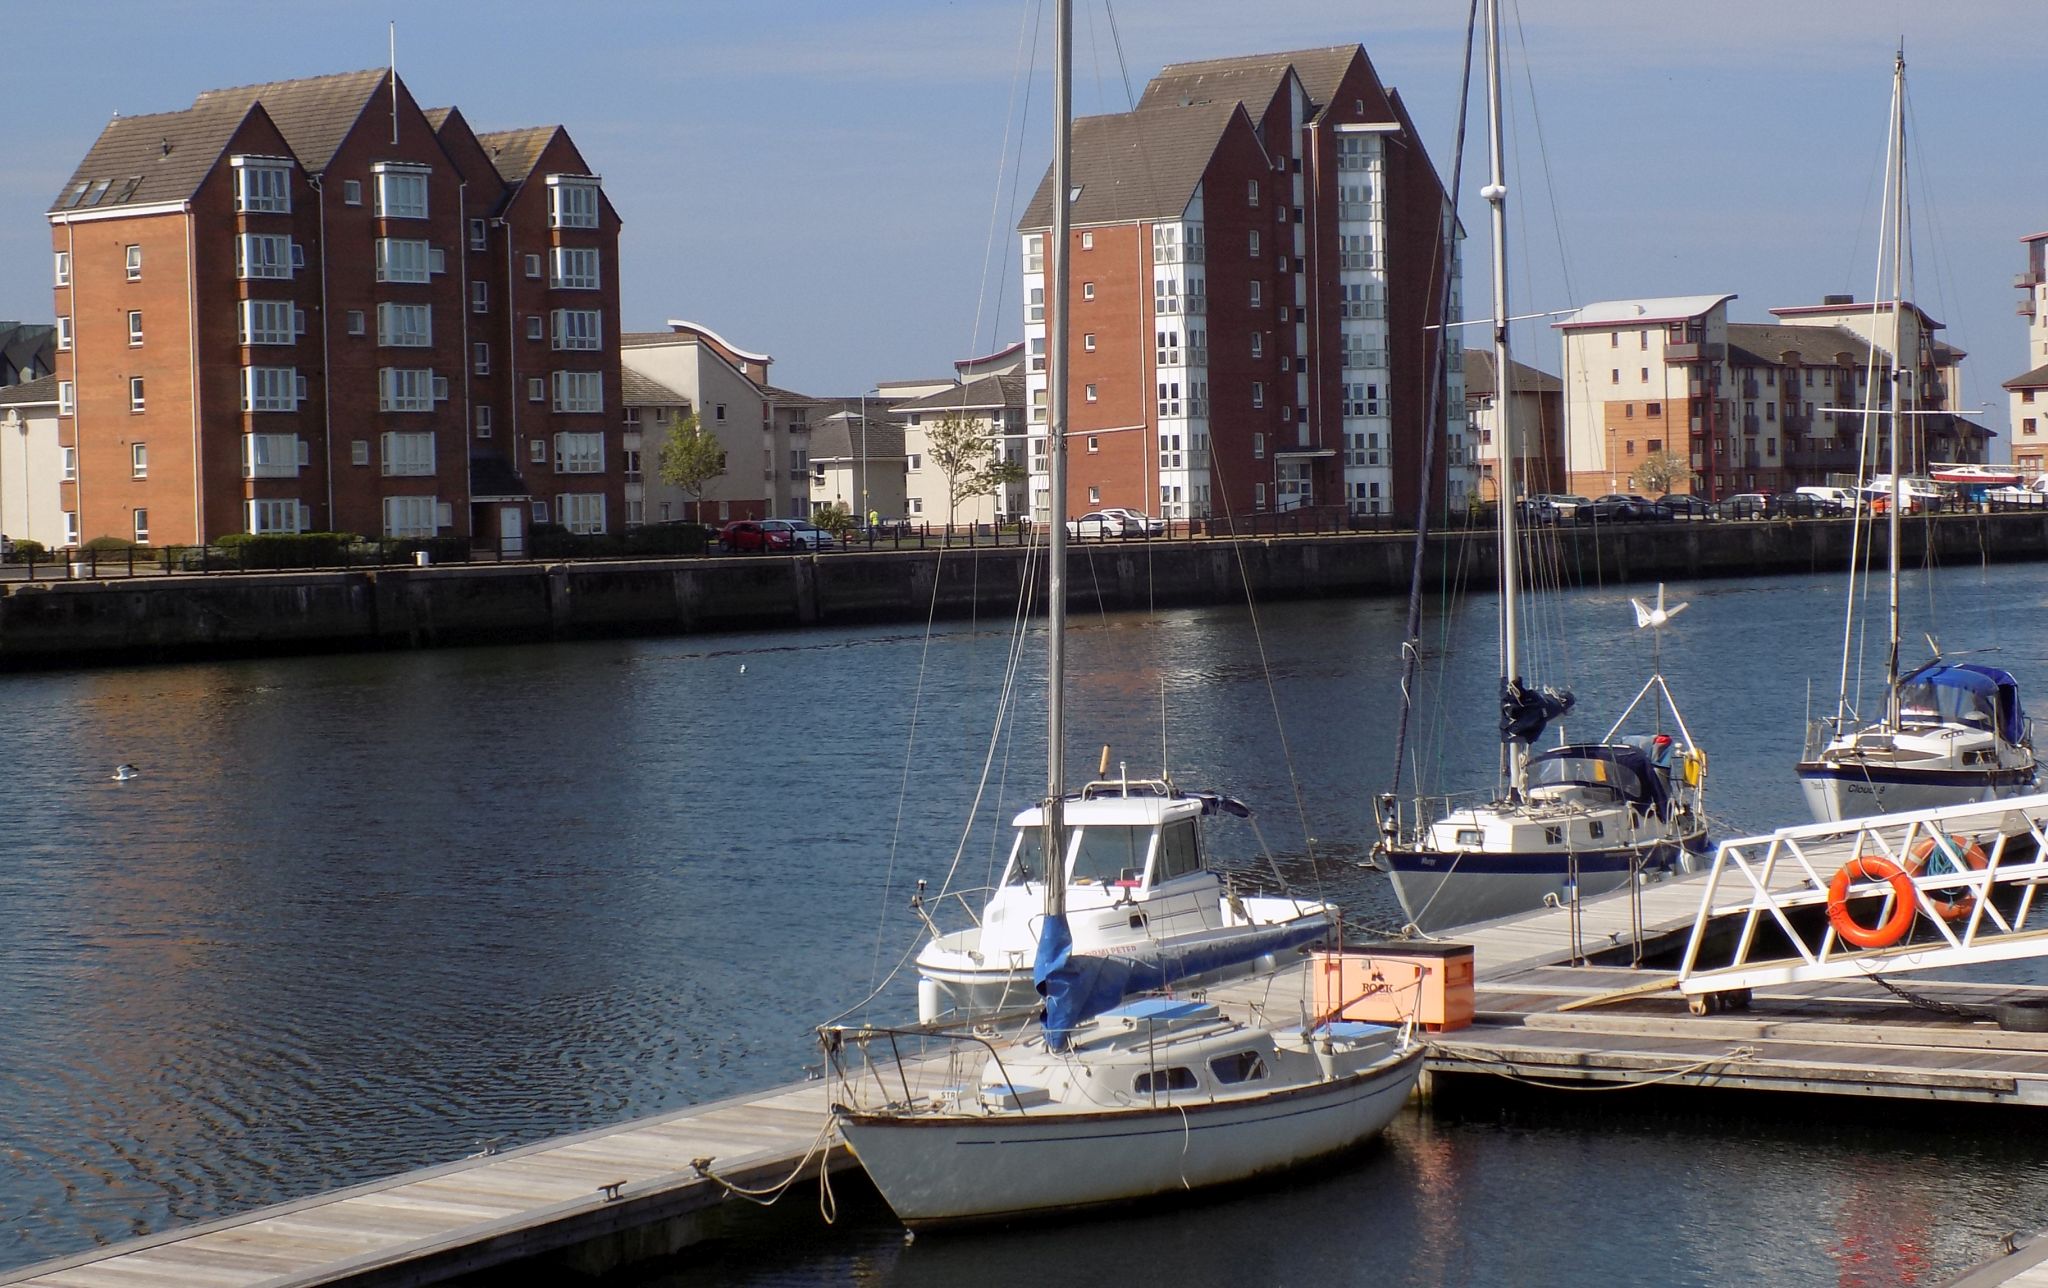 Yachts at Harbourside in Ayr